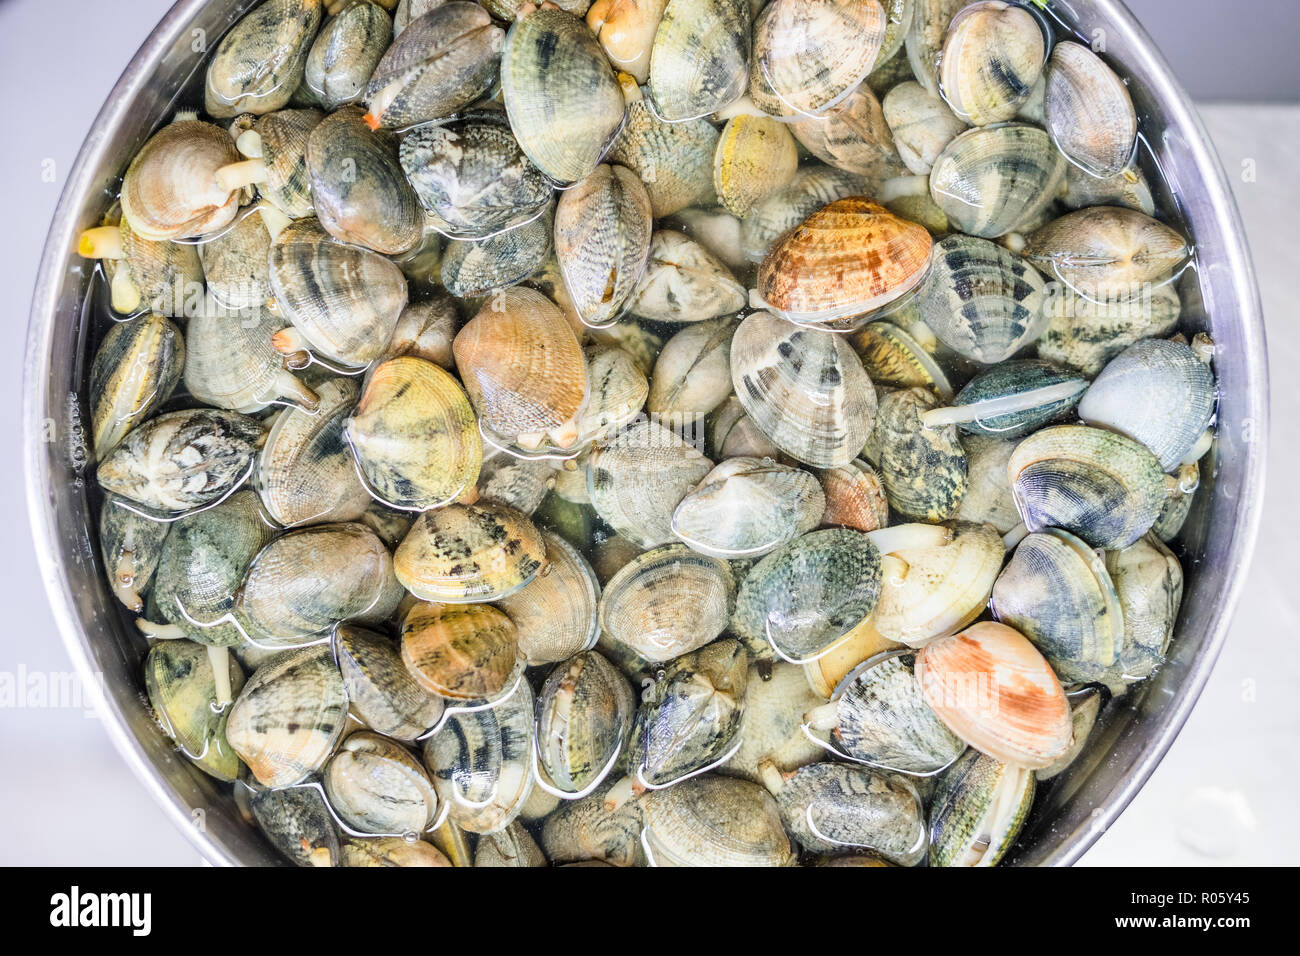 Clams in water in a silver bowl, Poland Stock Photo